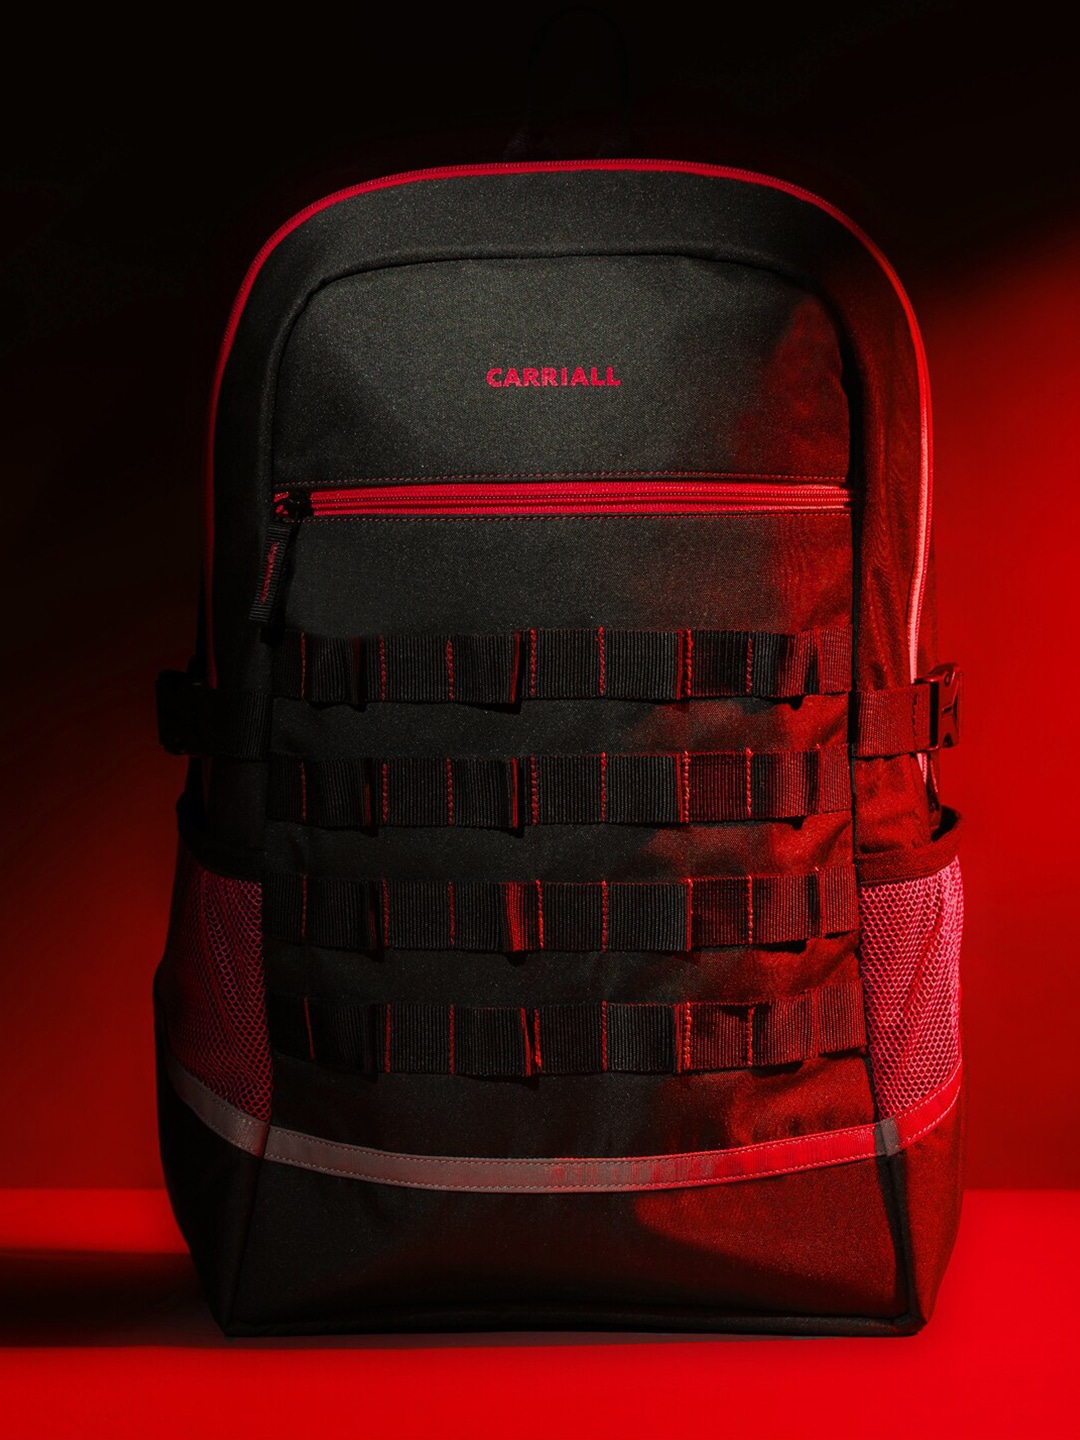 Accessories Backpacks | CARRIALL Unisex Black & Red Backpack with Reflective Strip - BX99487